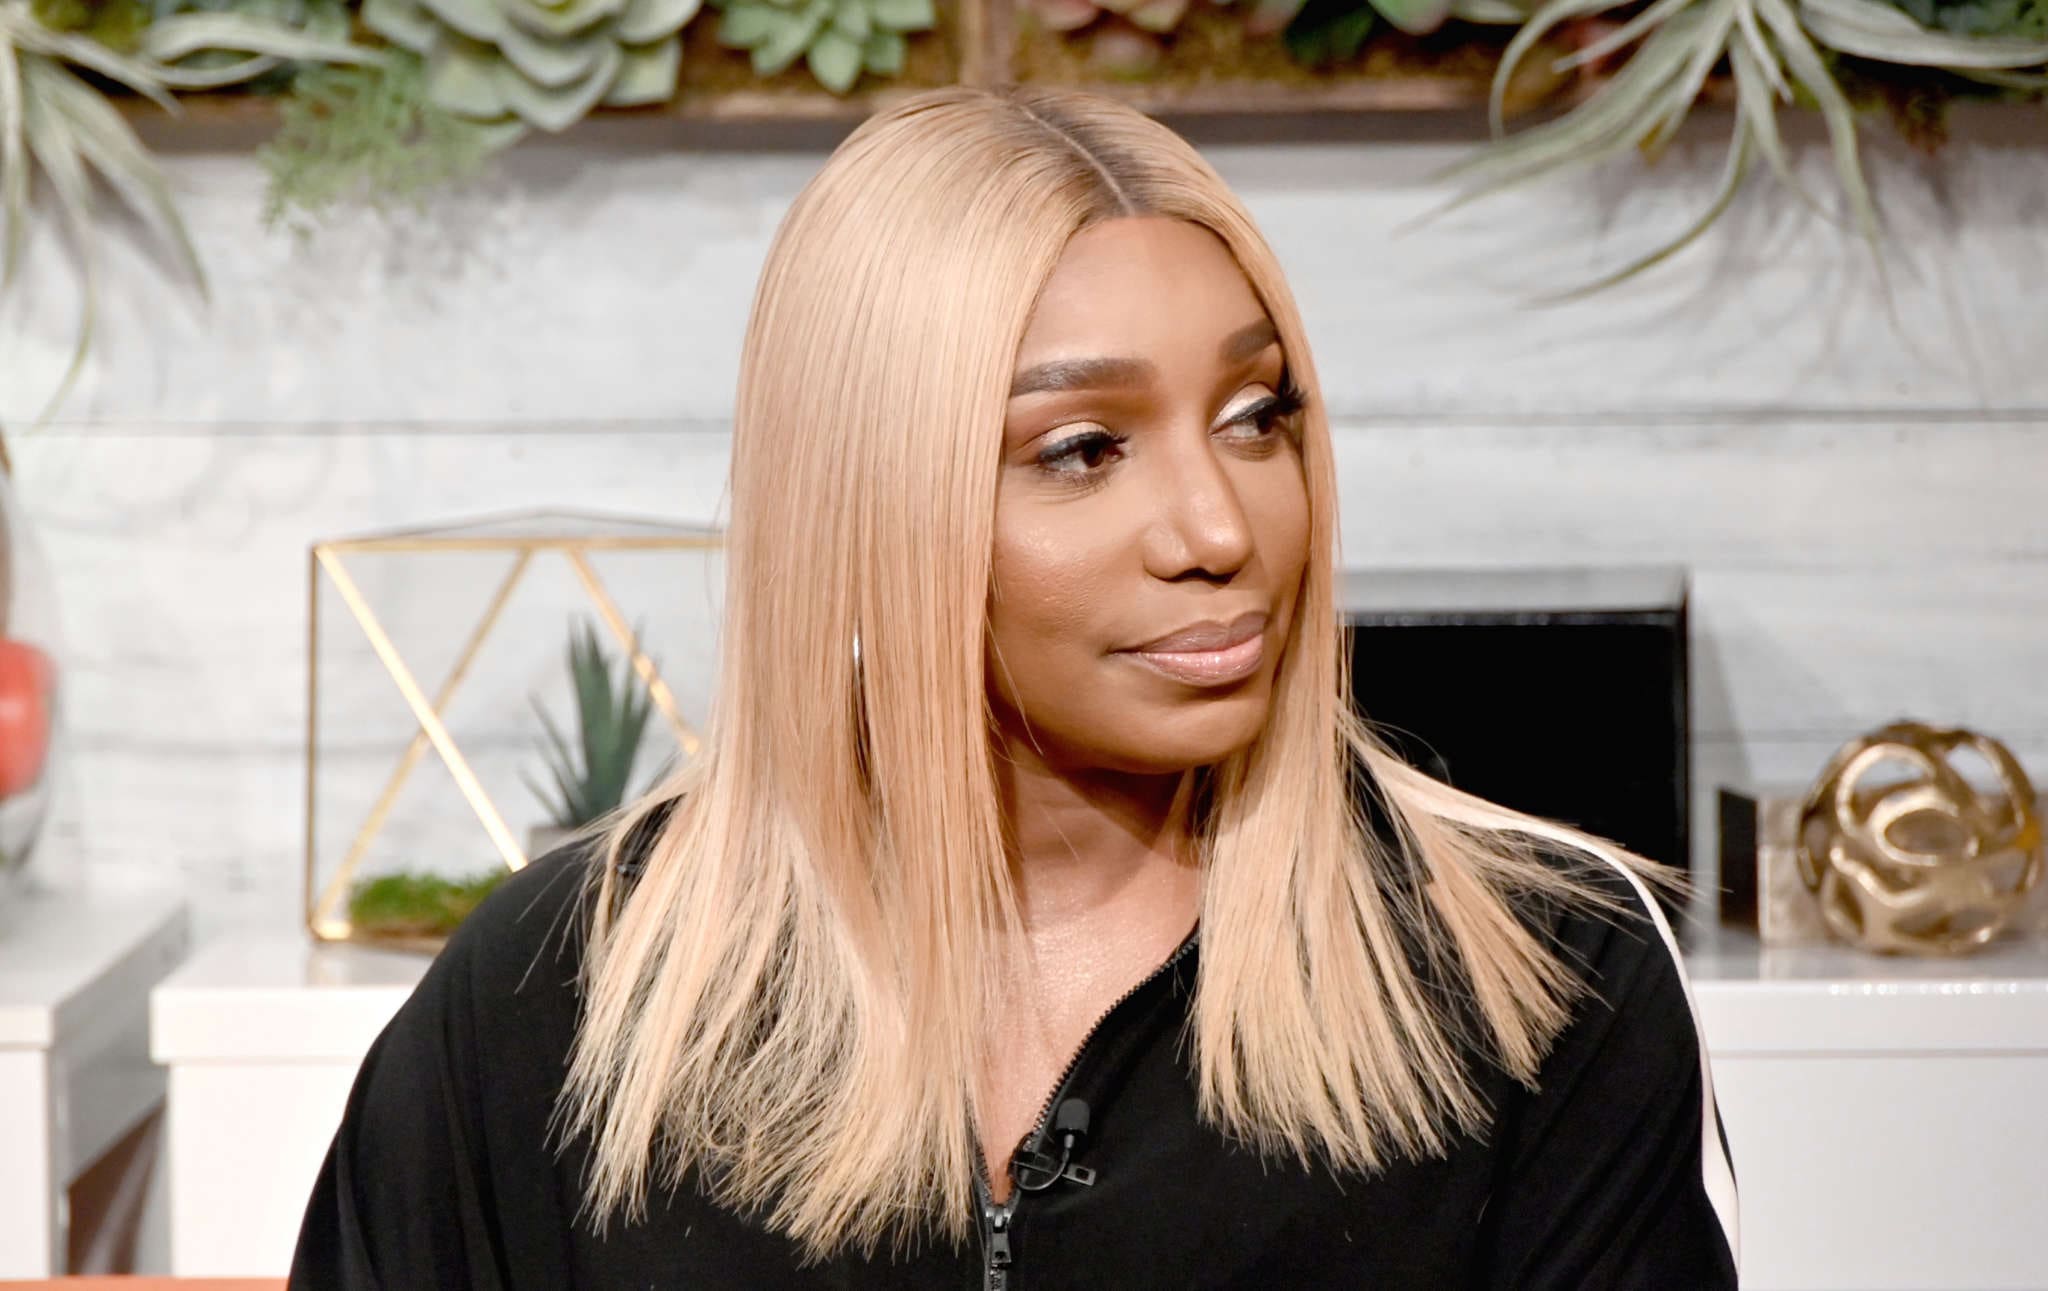 NeNe Leakes Looks Gorgeous In A Black Lace Outfit For A Friend's Birthday